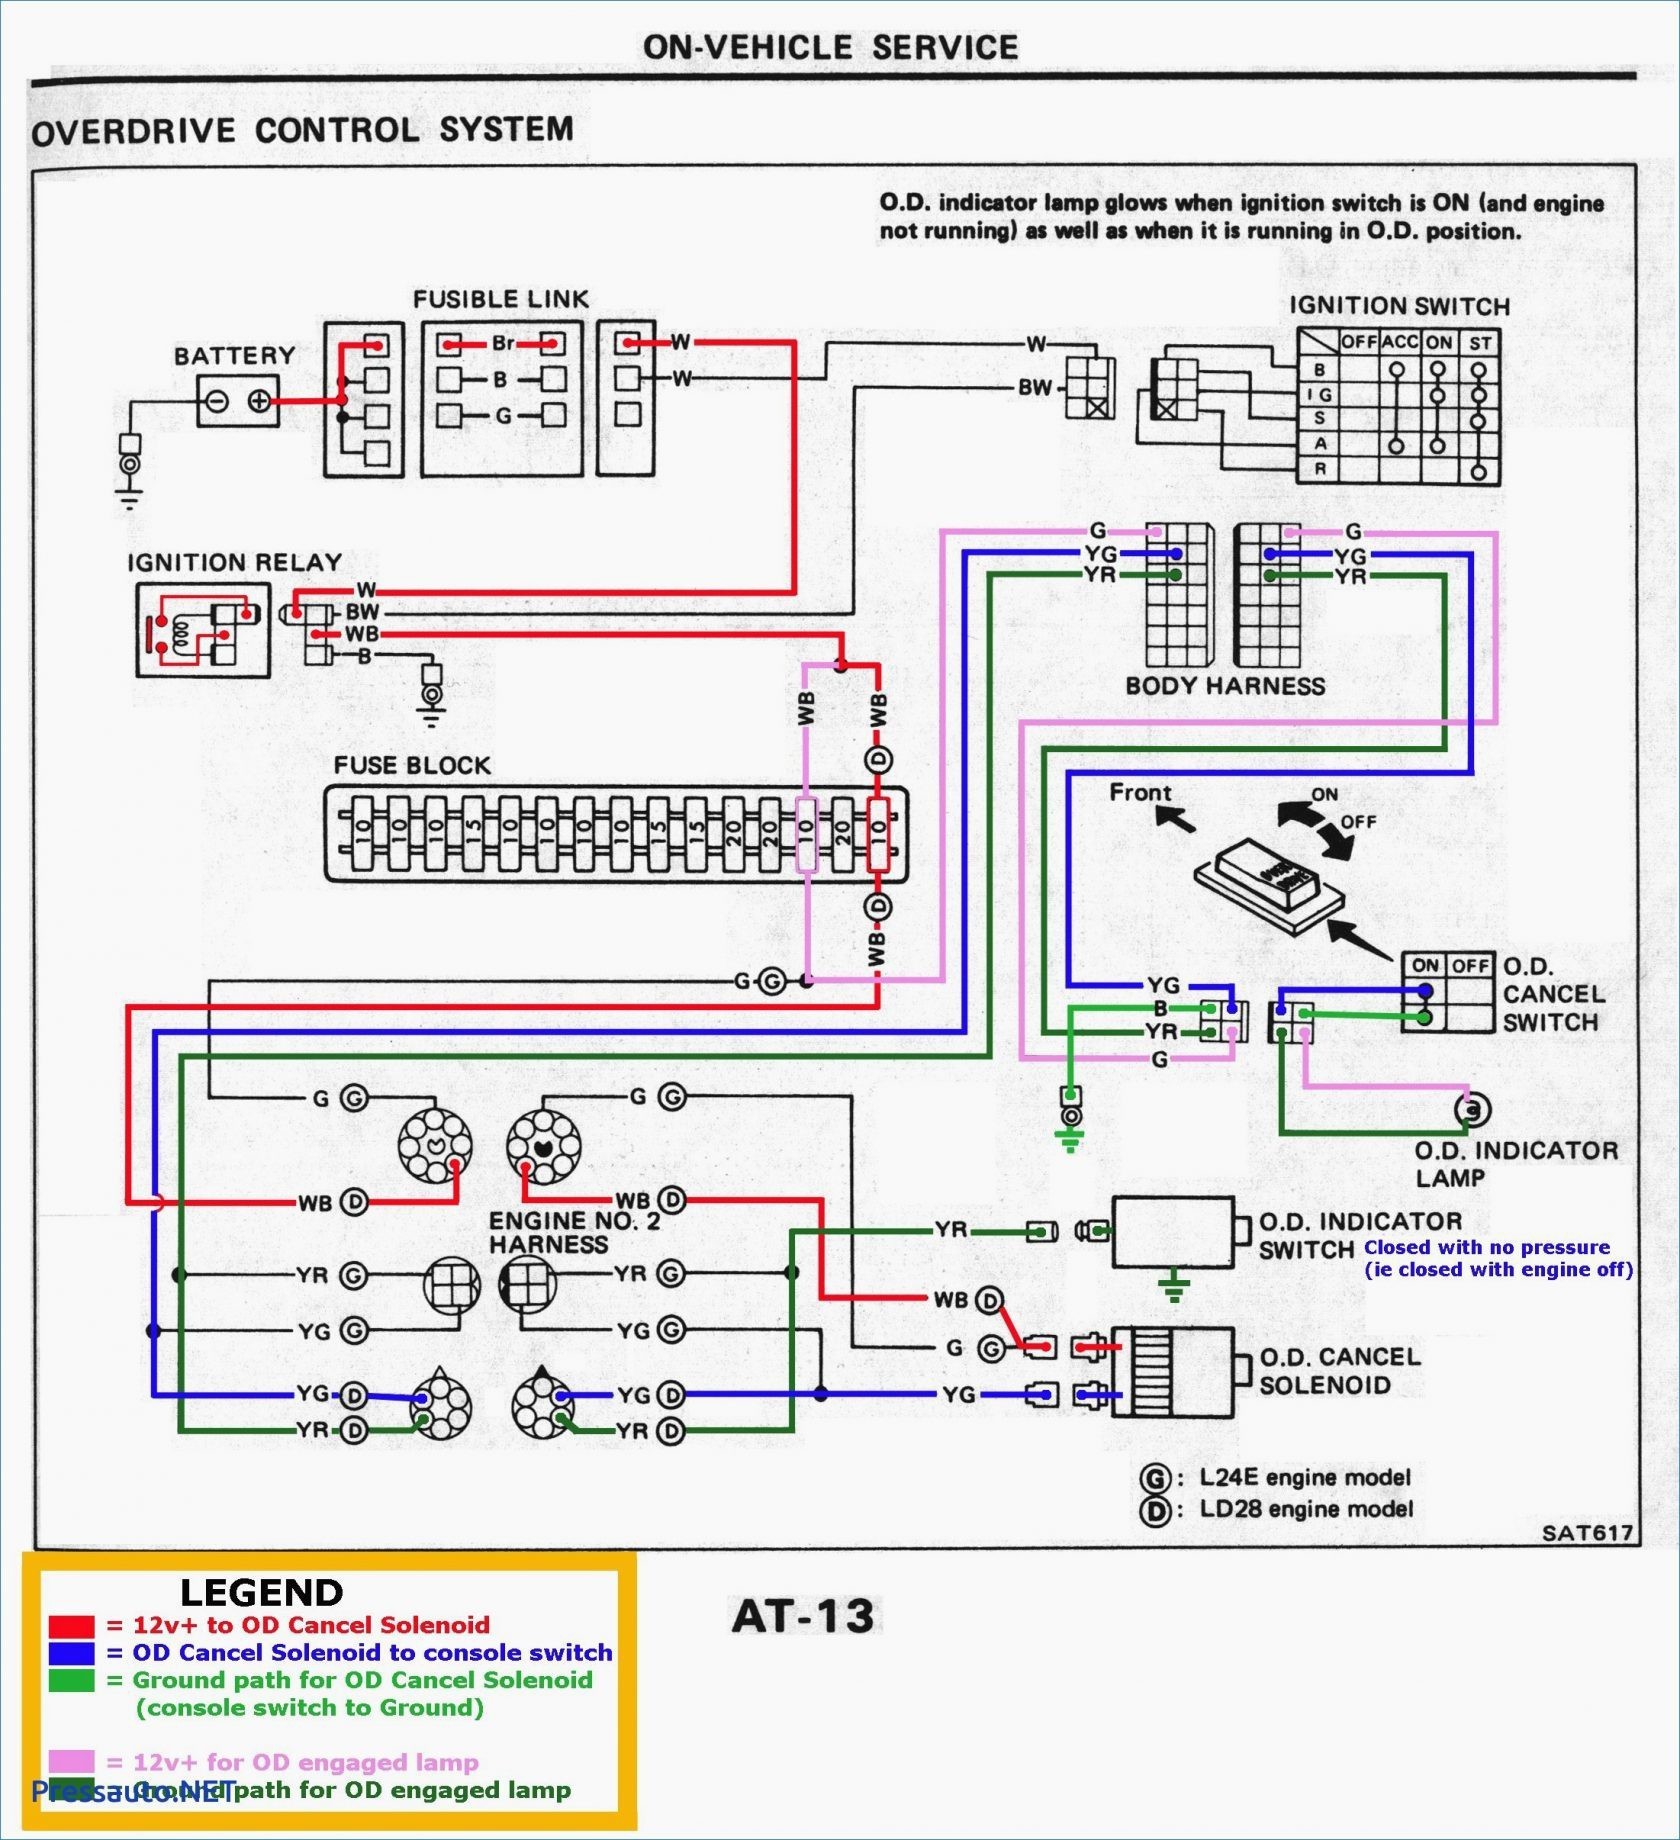 Engine Diagrams for Cars Throttle Position Sensor Wiring Diagram Book Wiring Diagram Auto Of Engine Diagrams for Cars